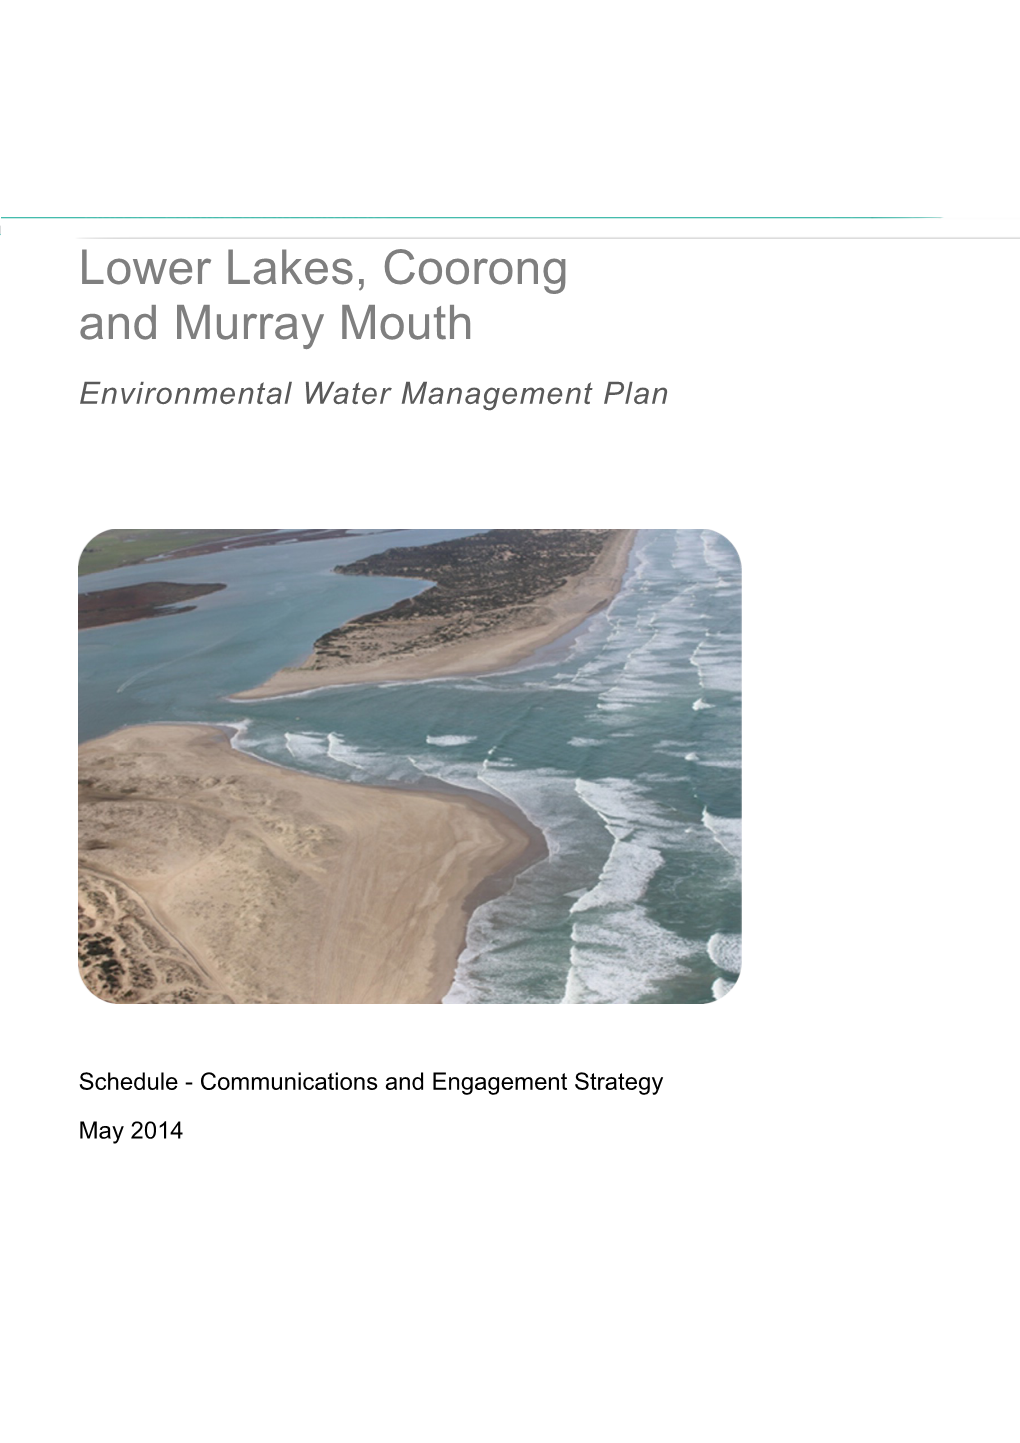 Lower Lakes, Coorong and Murray Mouth - Environmental Water Management Plan - Schedule